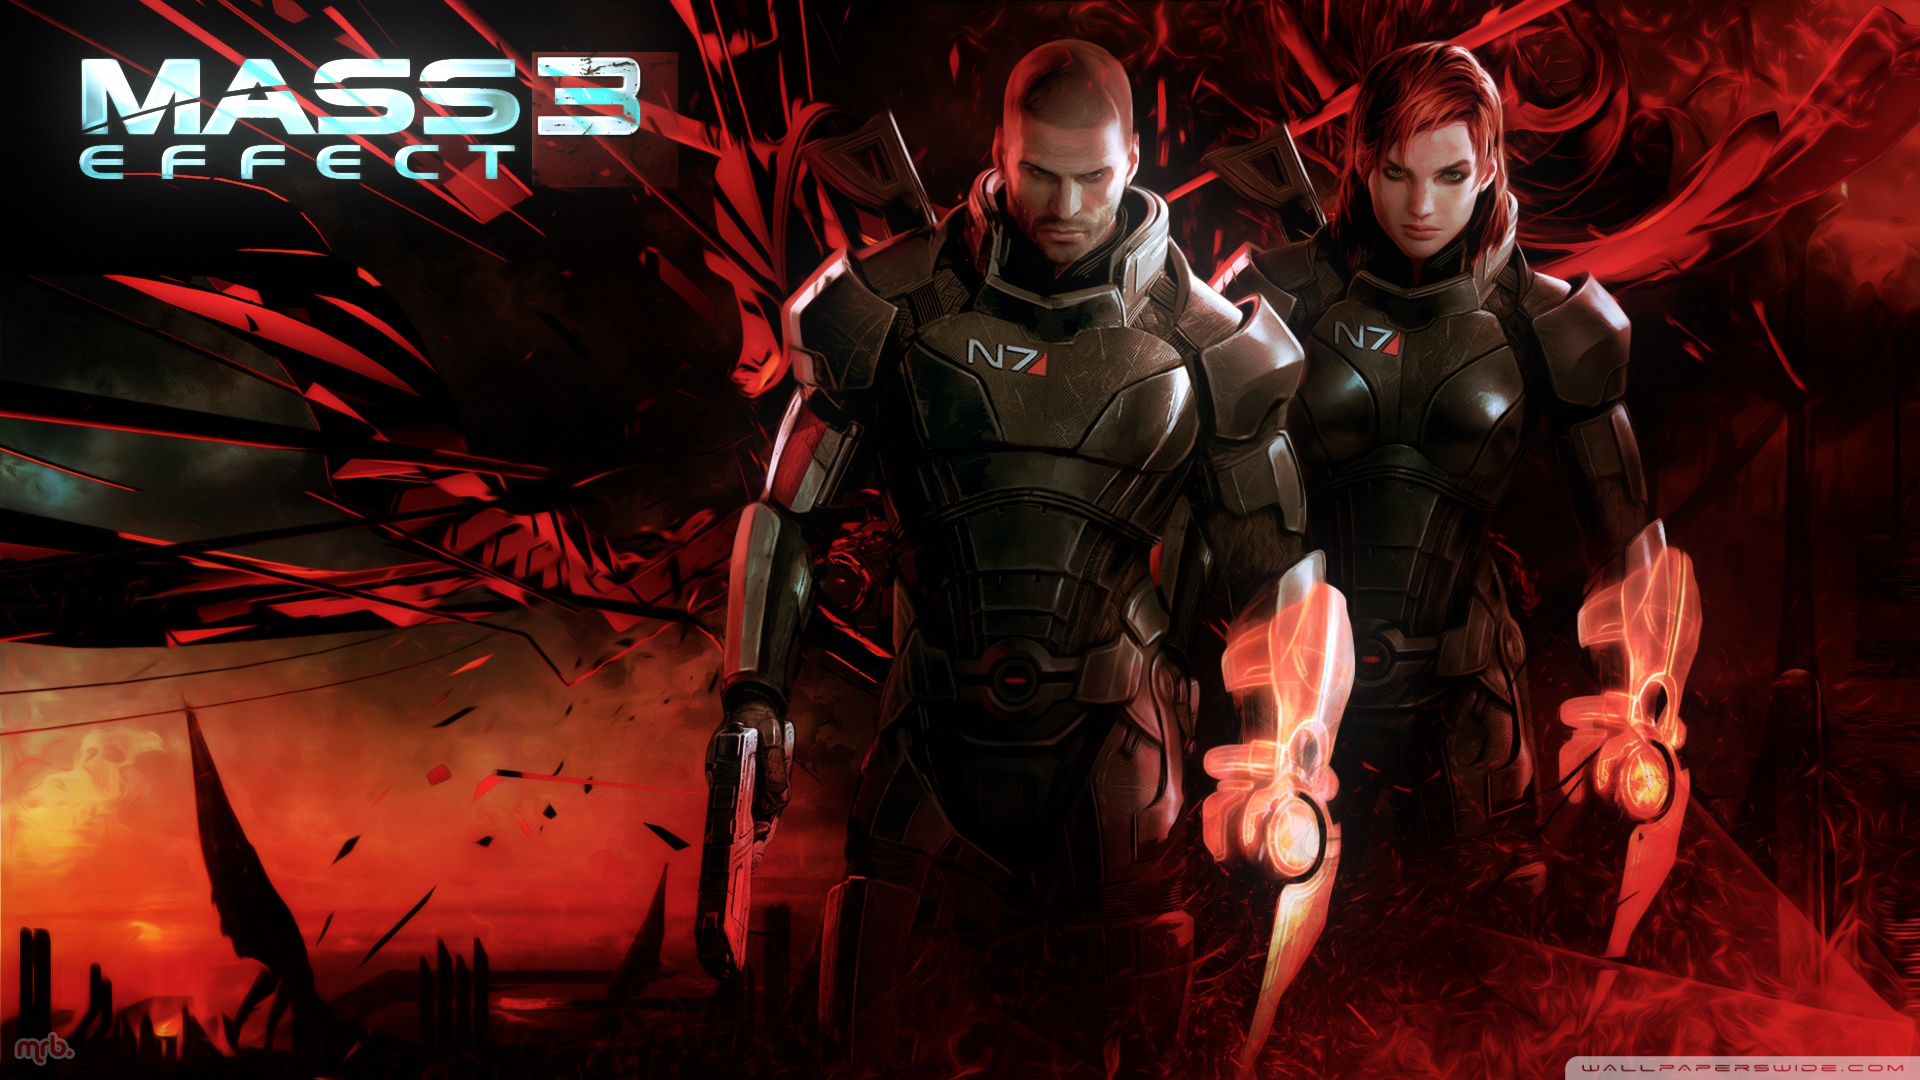 mass effect live wallpaper,action adventure game,pc game,superhero,fictional character,movie